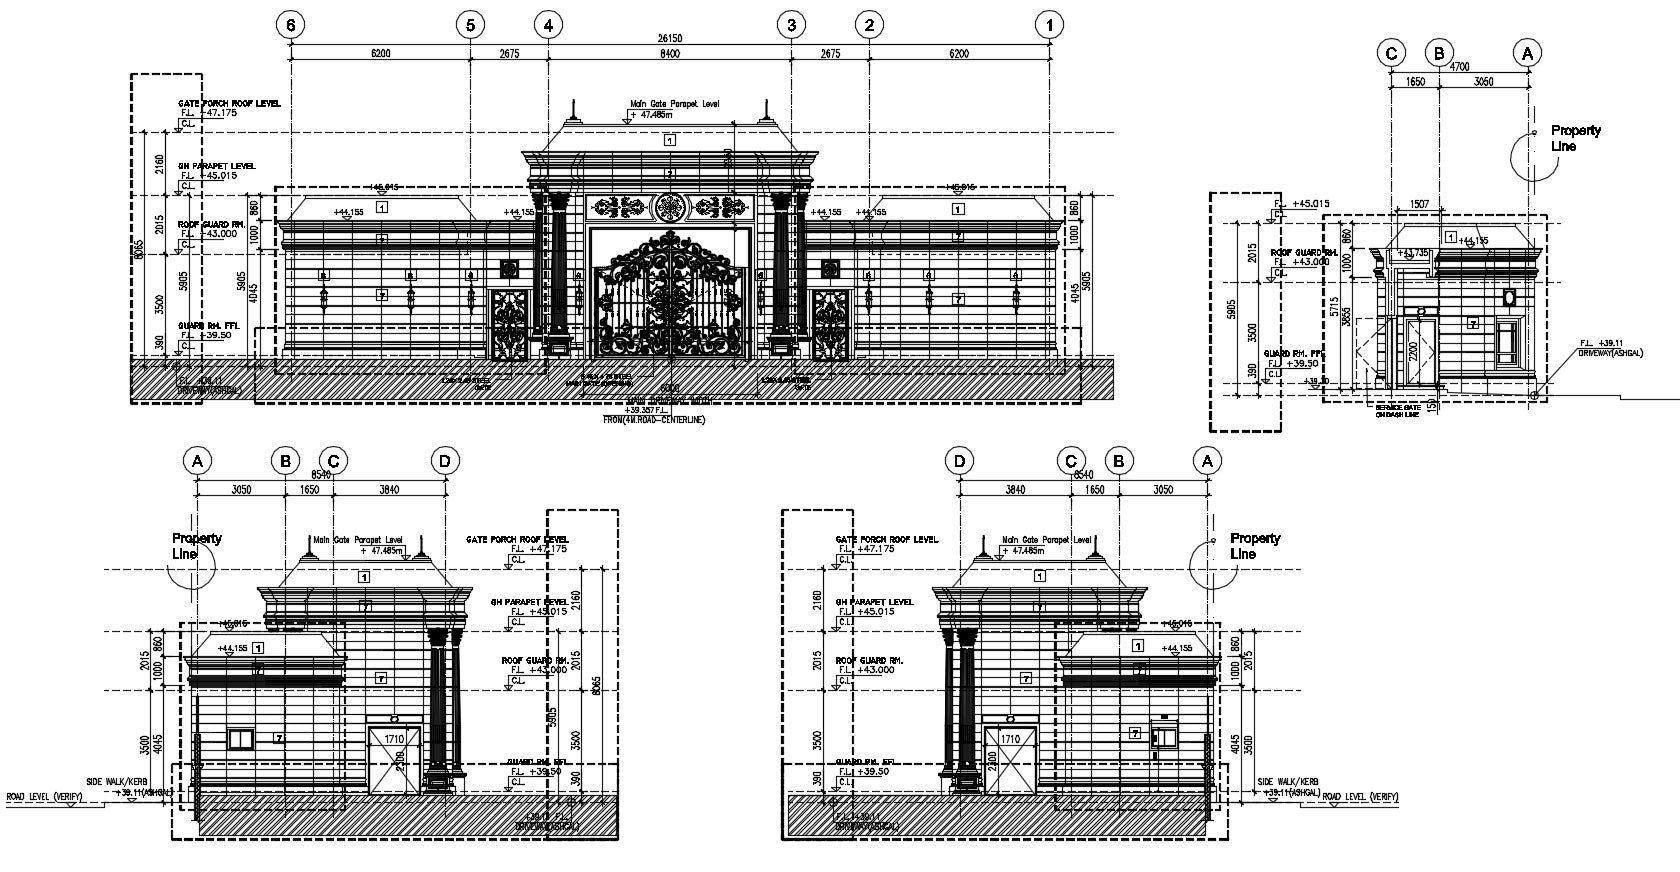 Main Gate Structure detail. FLOORING LAYOUT PLAN, INSIDE (REAR) ELEVATION, SECTION A-A, RIGHT SIDE ELEVATION, LEFT SIDE ELEVATION, ROOF PLAN, etc